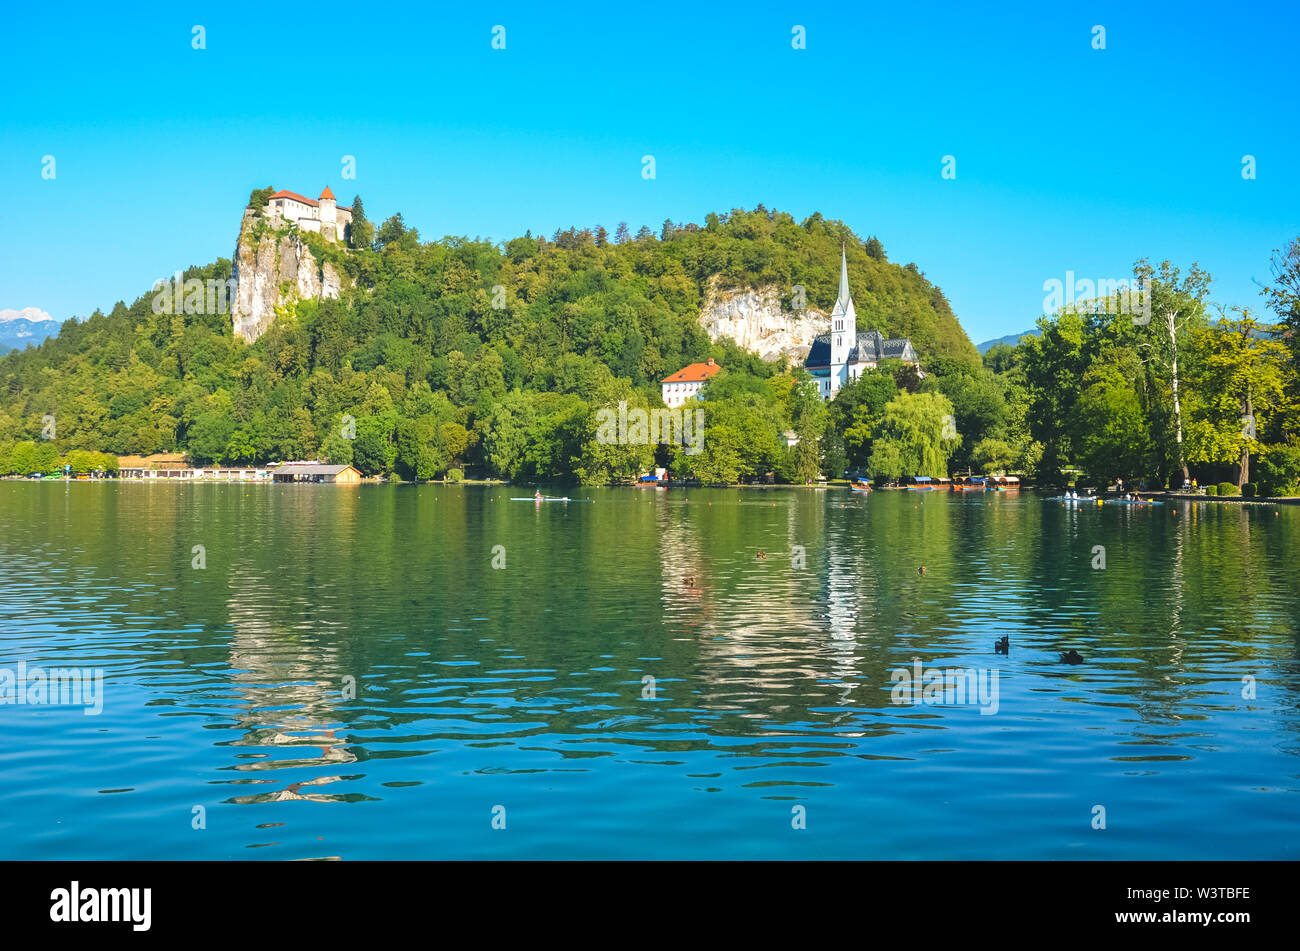 Historical Bled Castle surrounded by beautiful lake in Bled, Slovenia. Bled Lake is a popular travel destination and popular holiday spot. History, ancient, Europe. Stock Photo